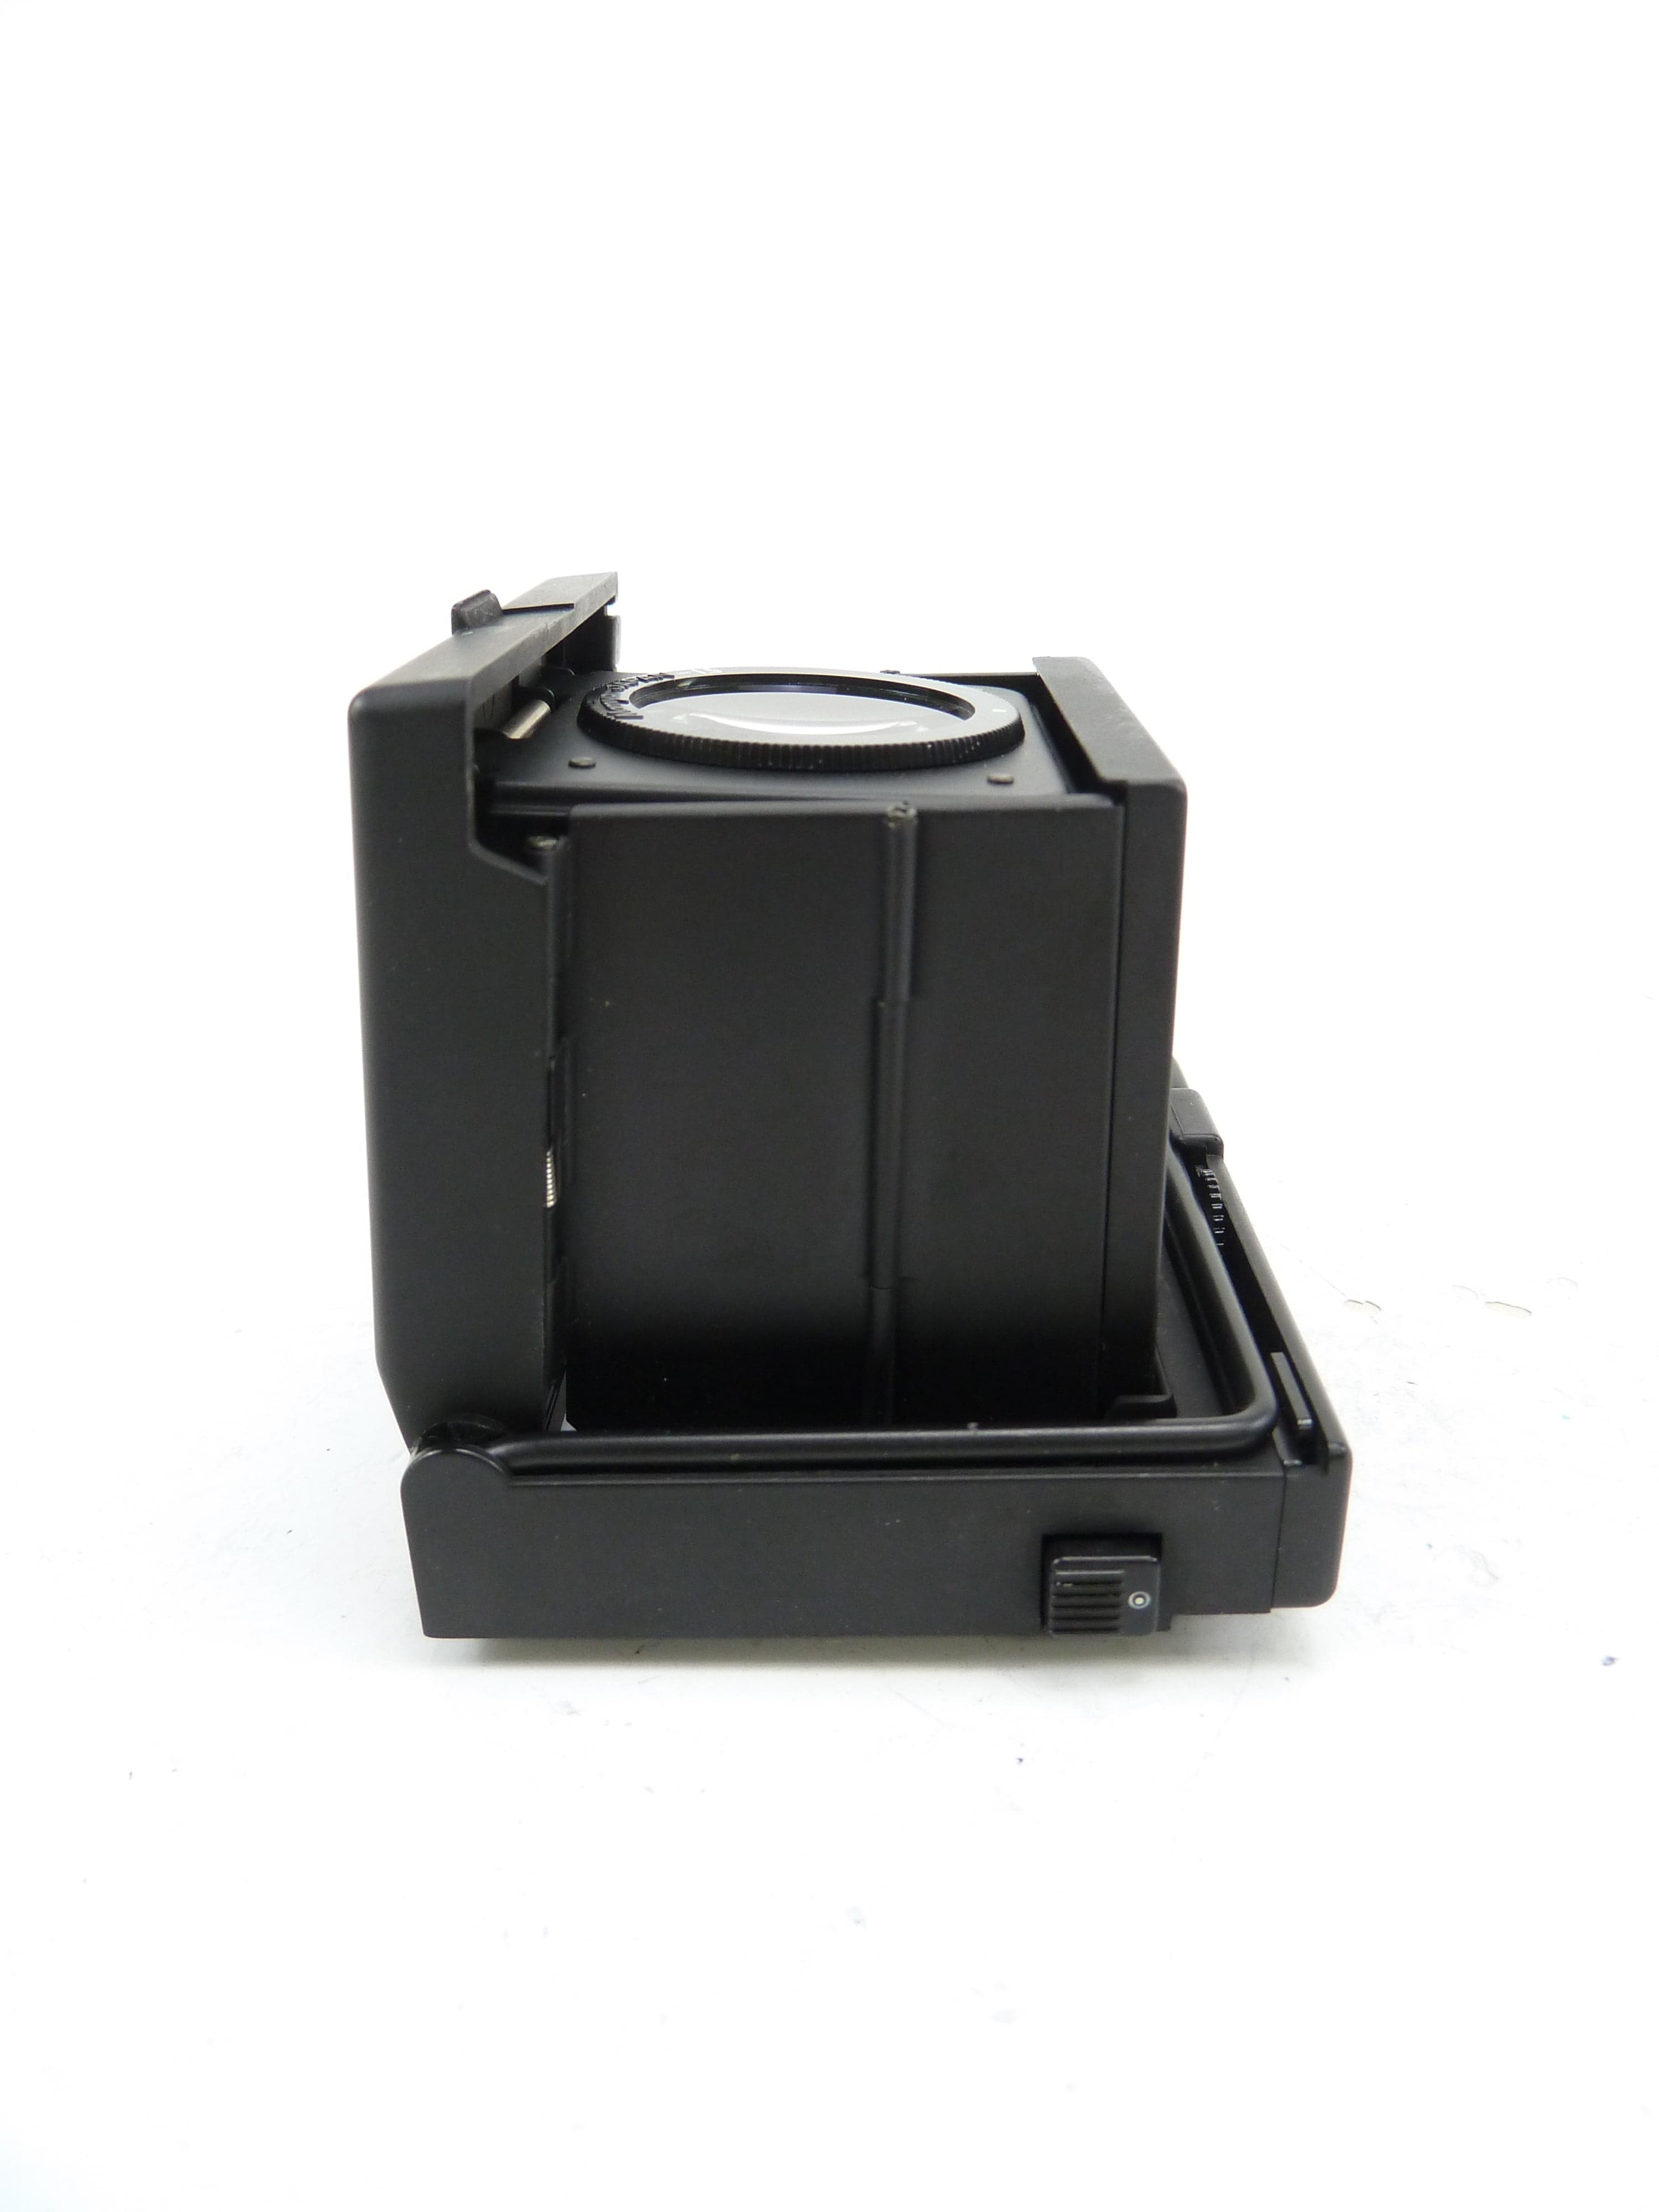 Mamiya 645 Pro Waist Level Finder for 645 Pro, Pro TL, and 645 Super